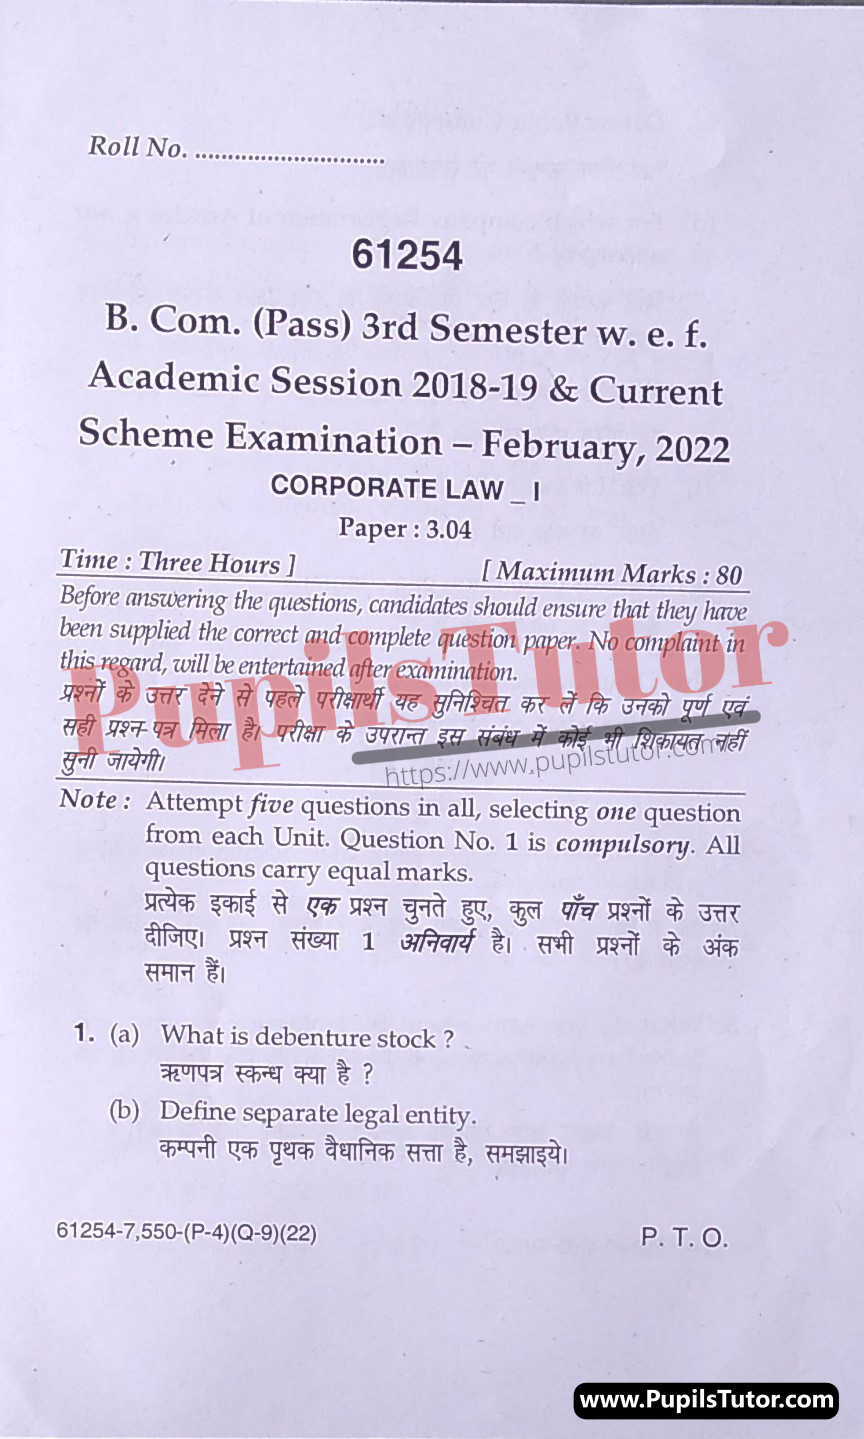 MDU (Maharshi Dayanand University, Rohtak Haryana) Bcom Pass Course Third Semester Previous Year Corporate Law Question Paper For February, 2022 Exam (Question Paper Page 1) - pupilstutor.com